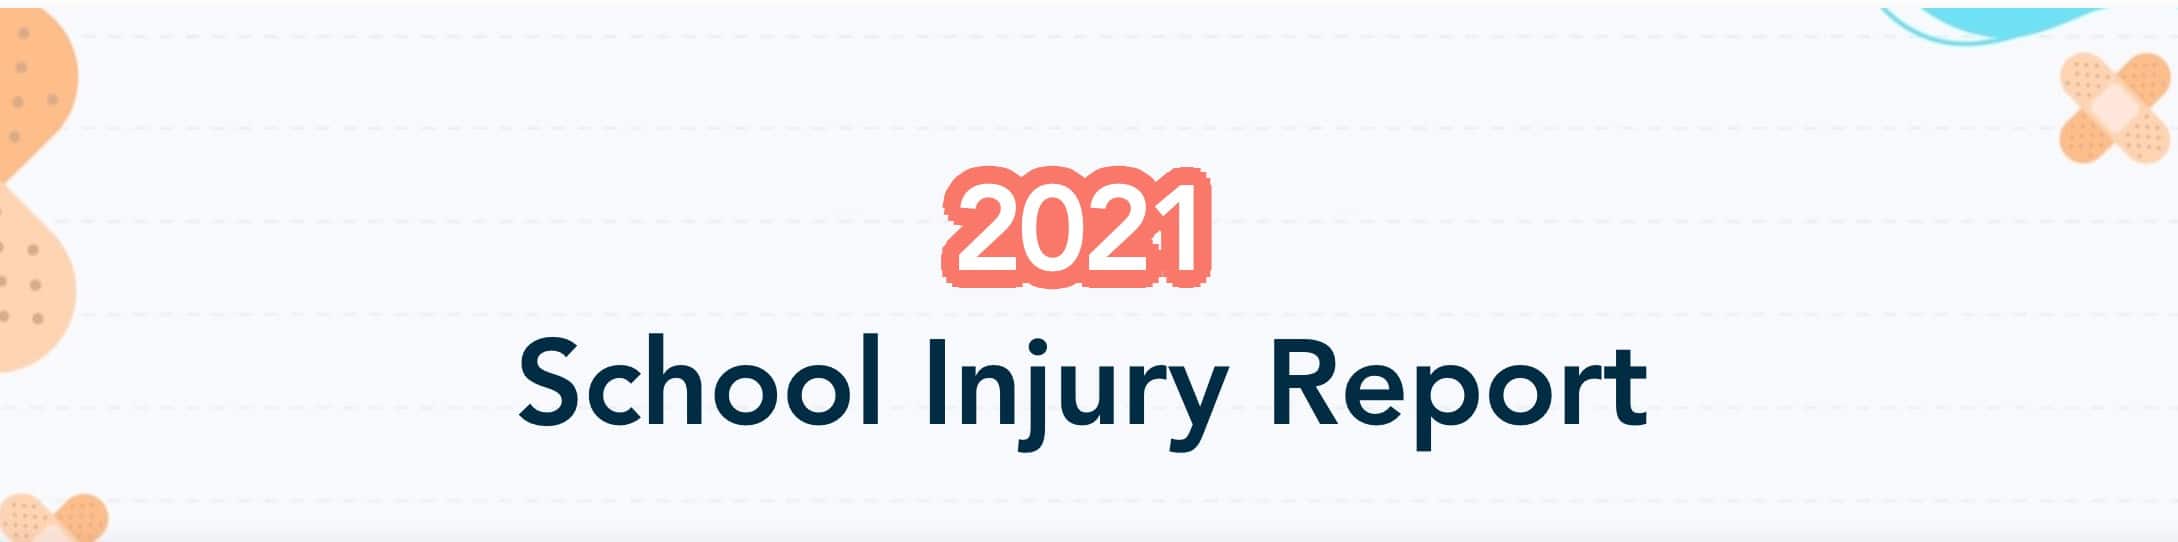 2021 School Injury Report Featured Image